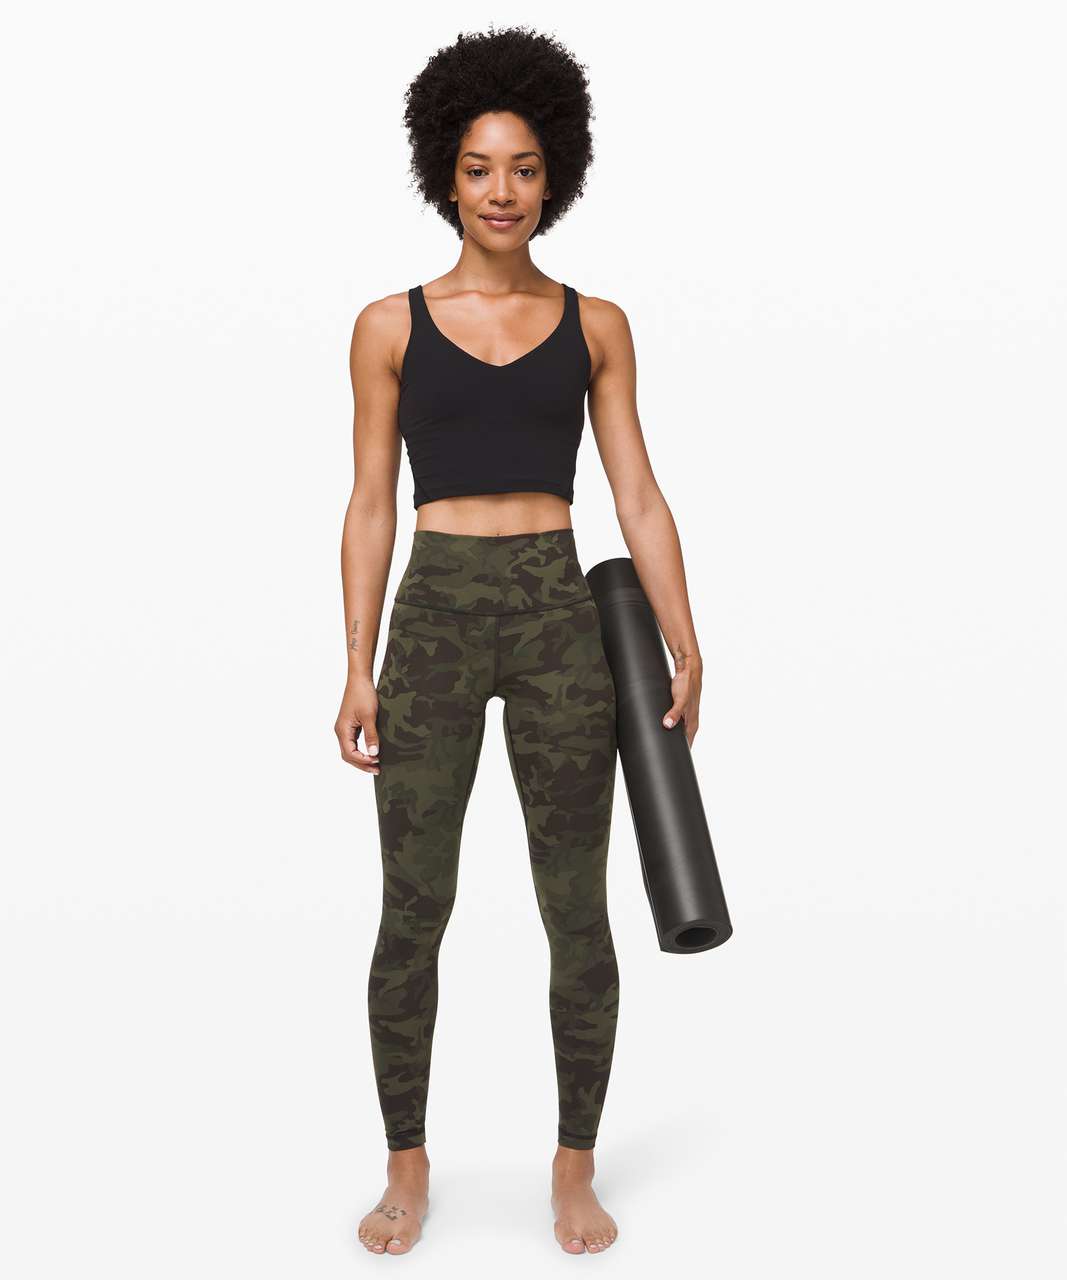 Lululemon Wunder Under High-Rise Tight 28" *Full-On Luxtreme - Incognito Camo Multi Gator Green